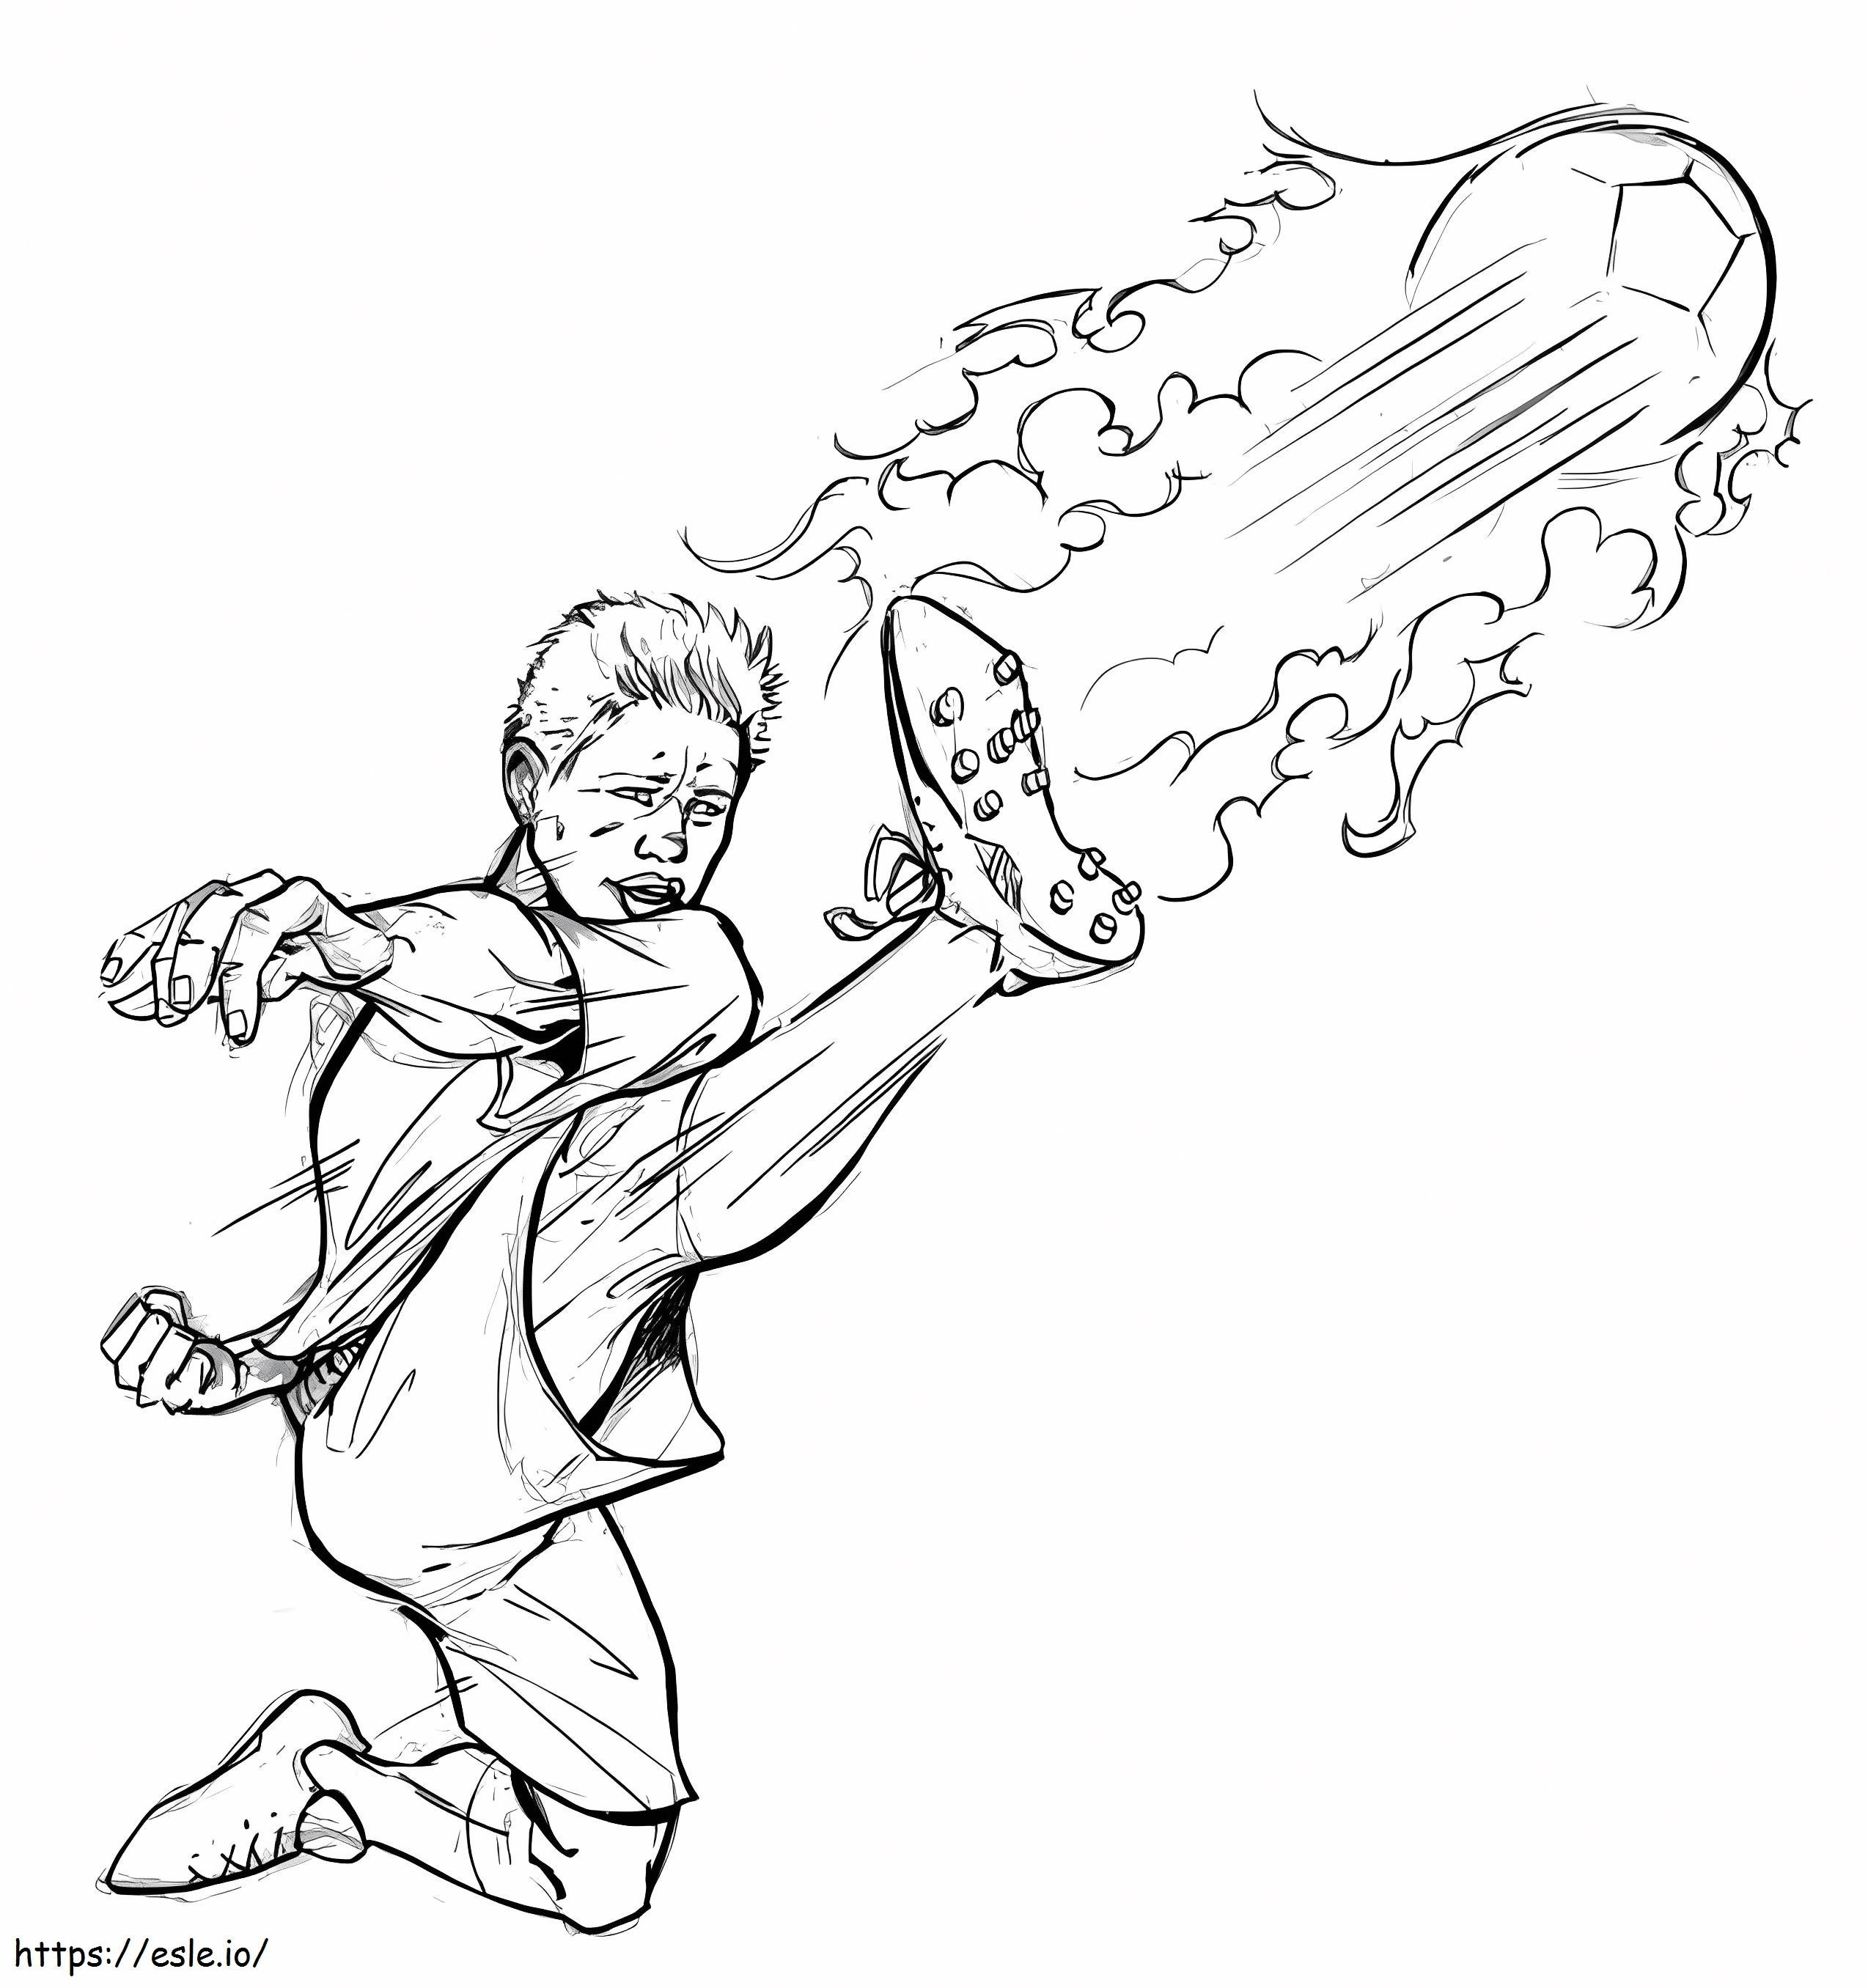 Kevin De Bruyne Kicks The Ball coloring page